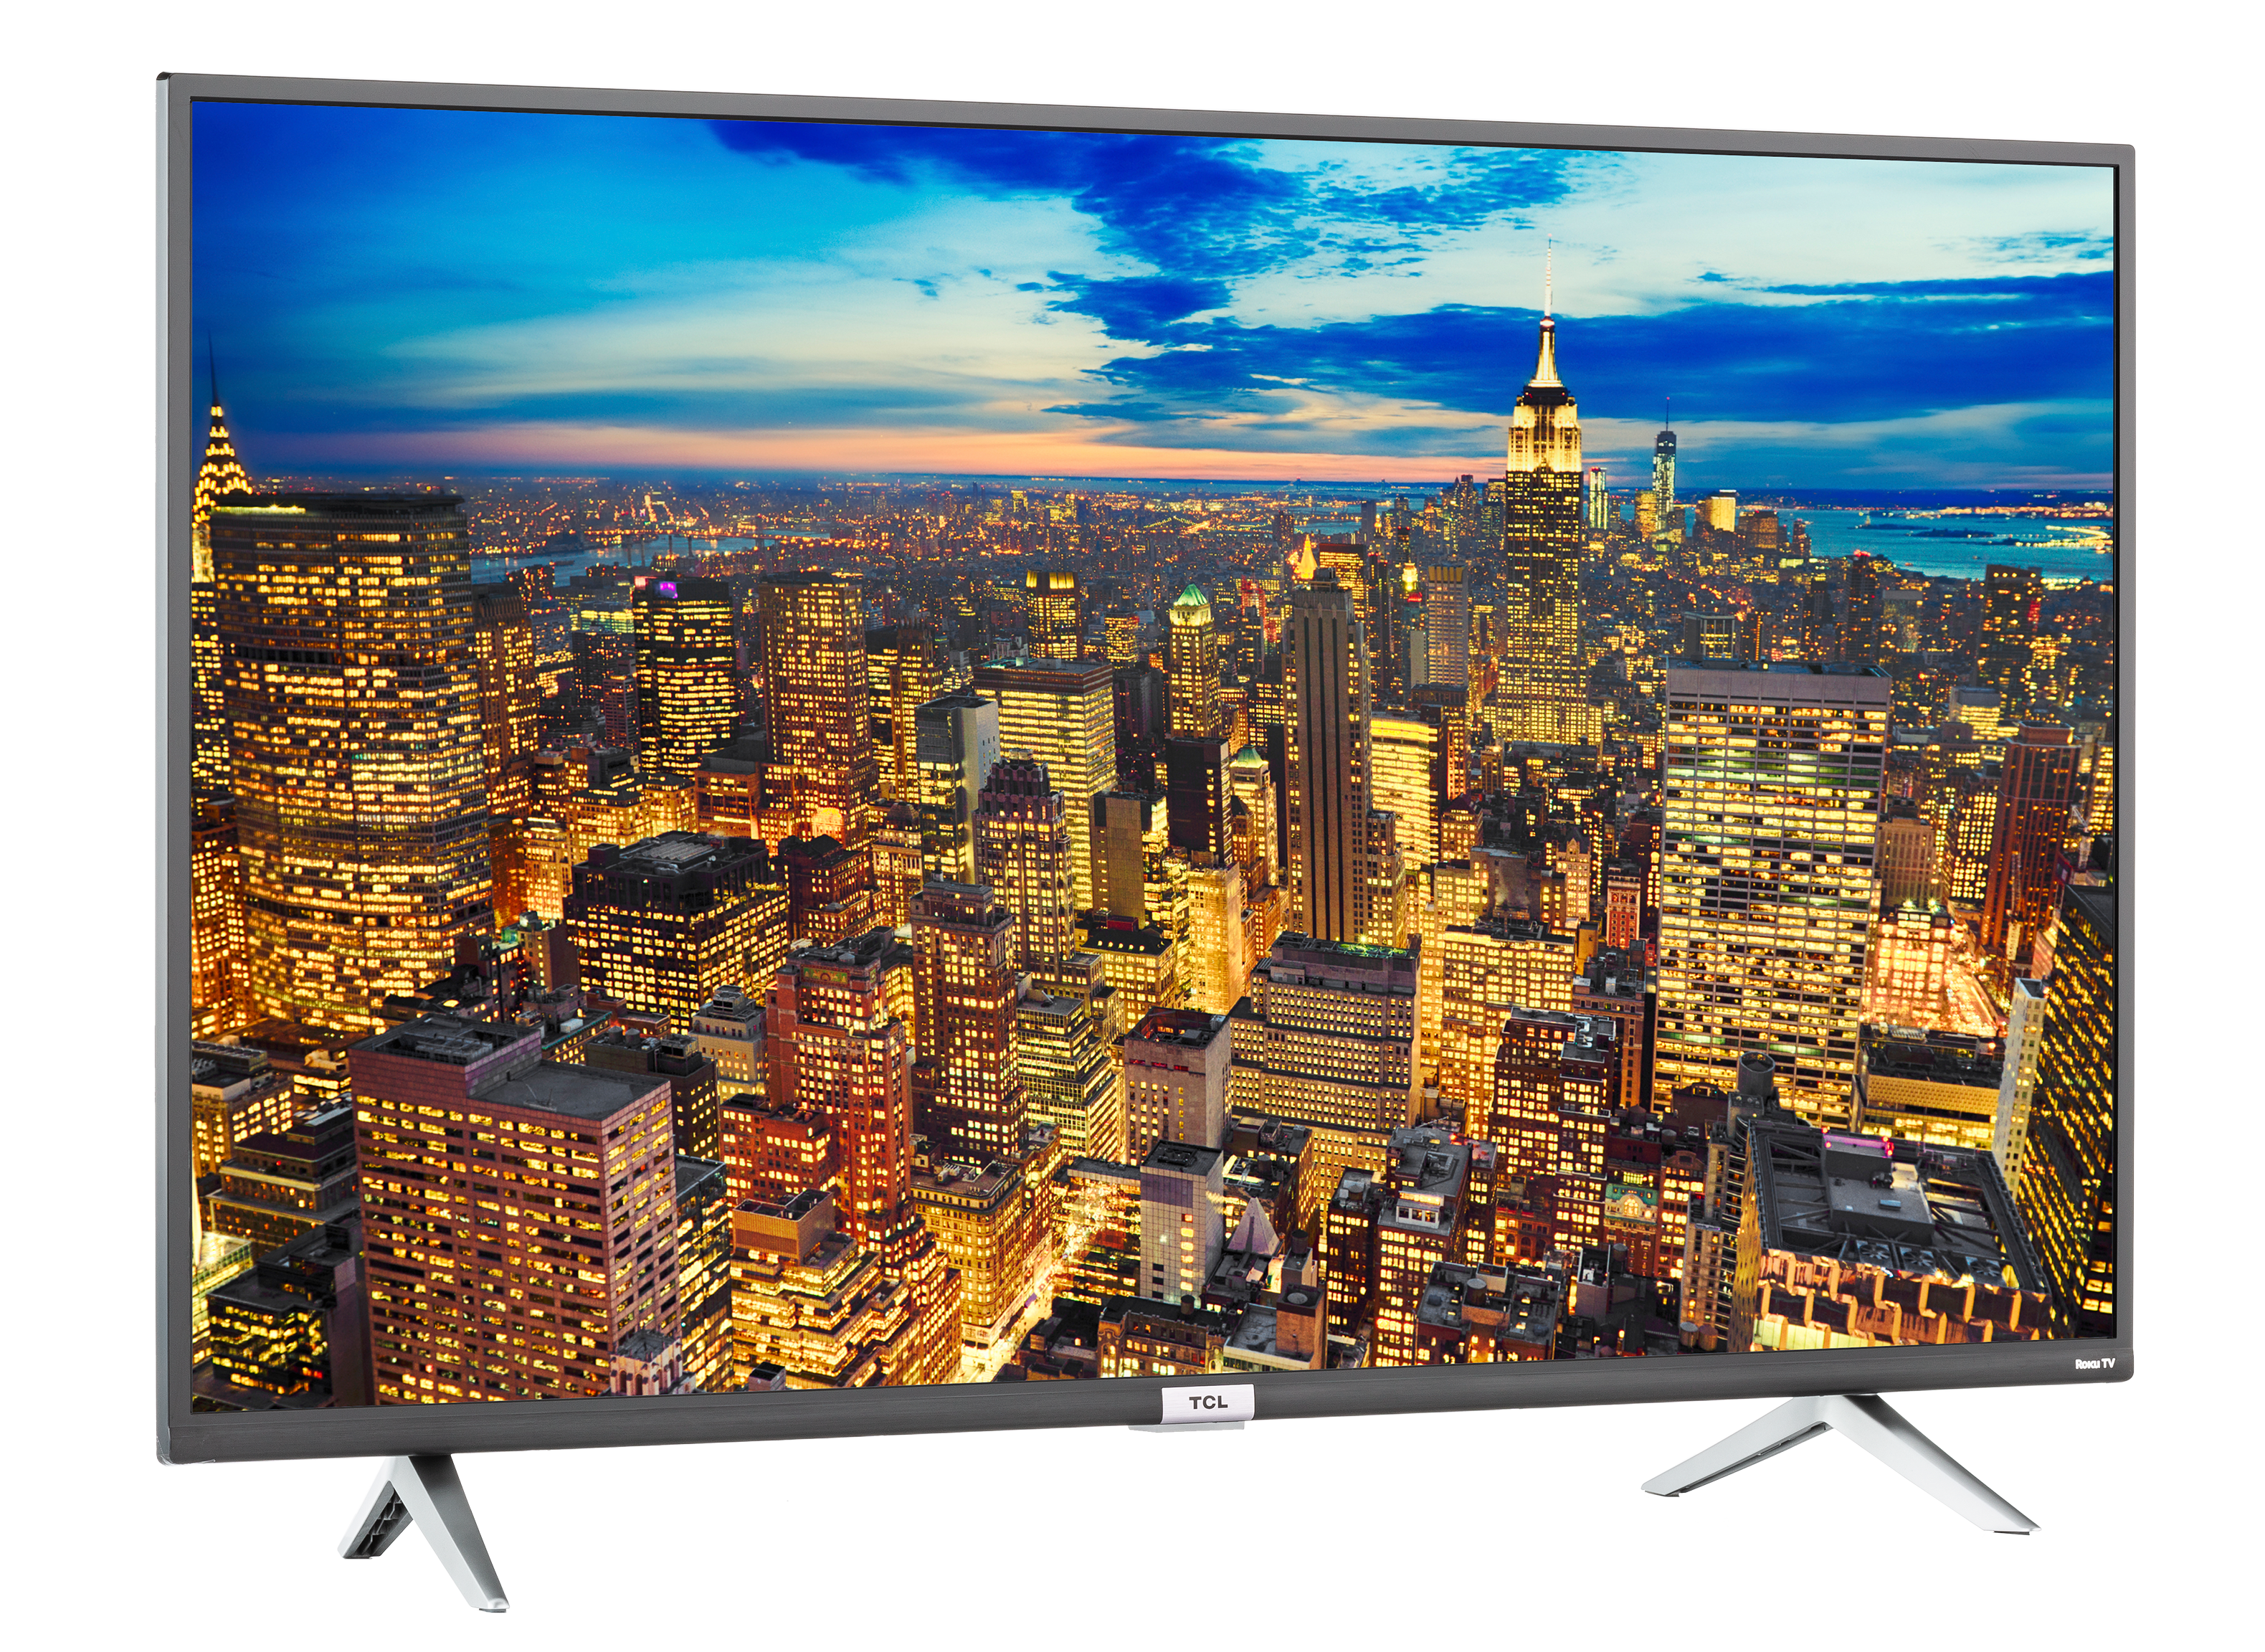 TCL 43S433 TV Review - Consumer Reports